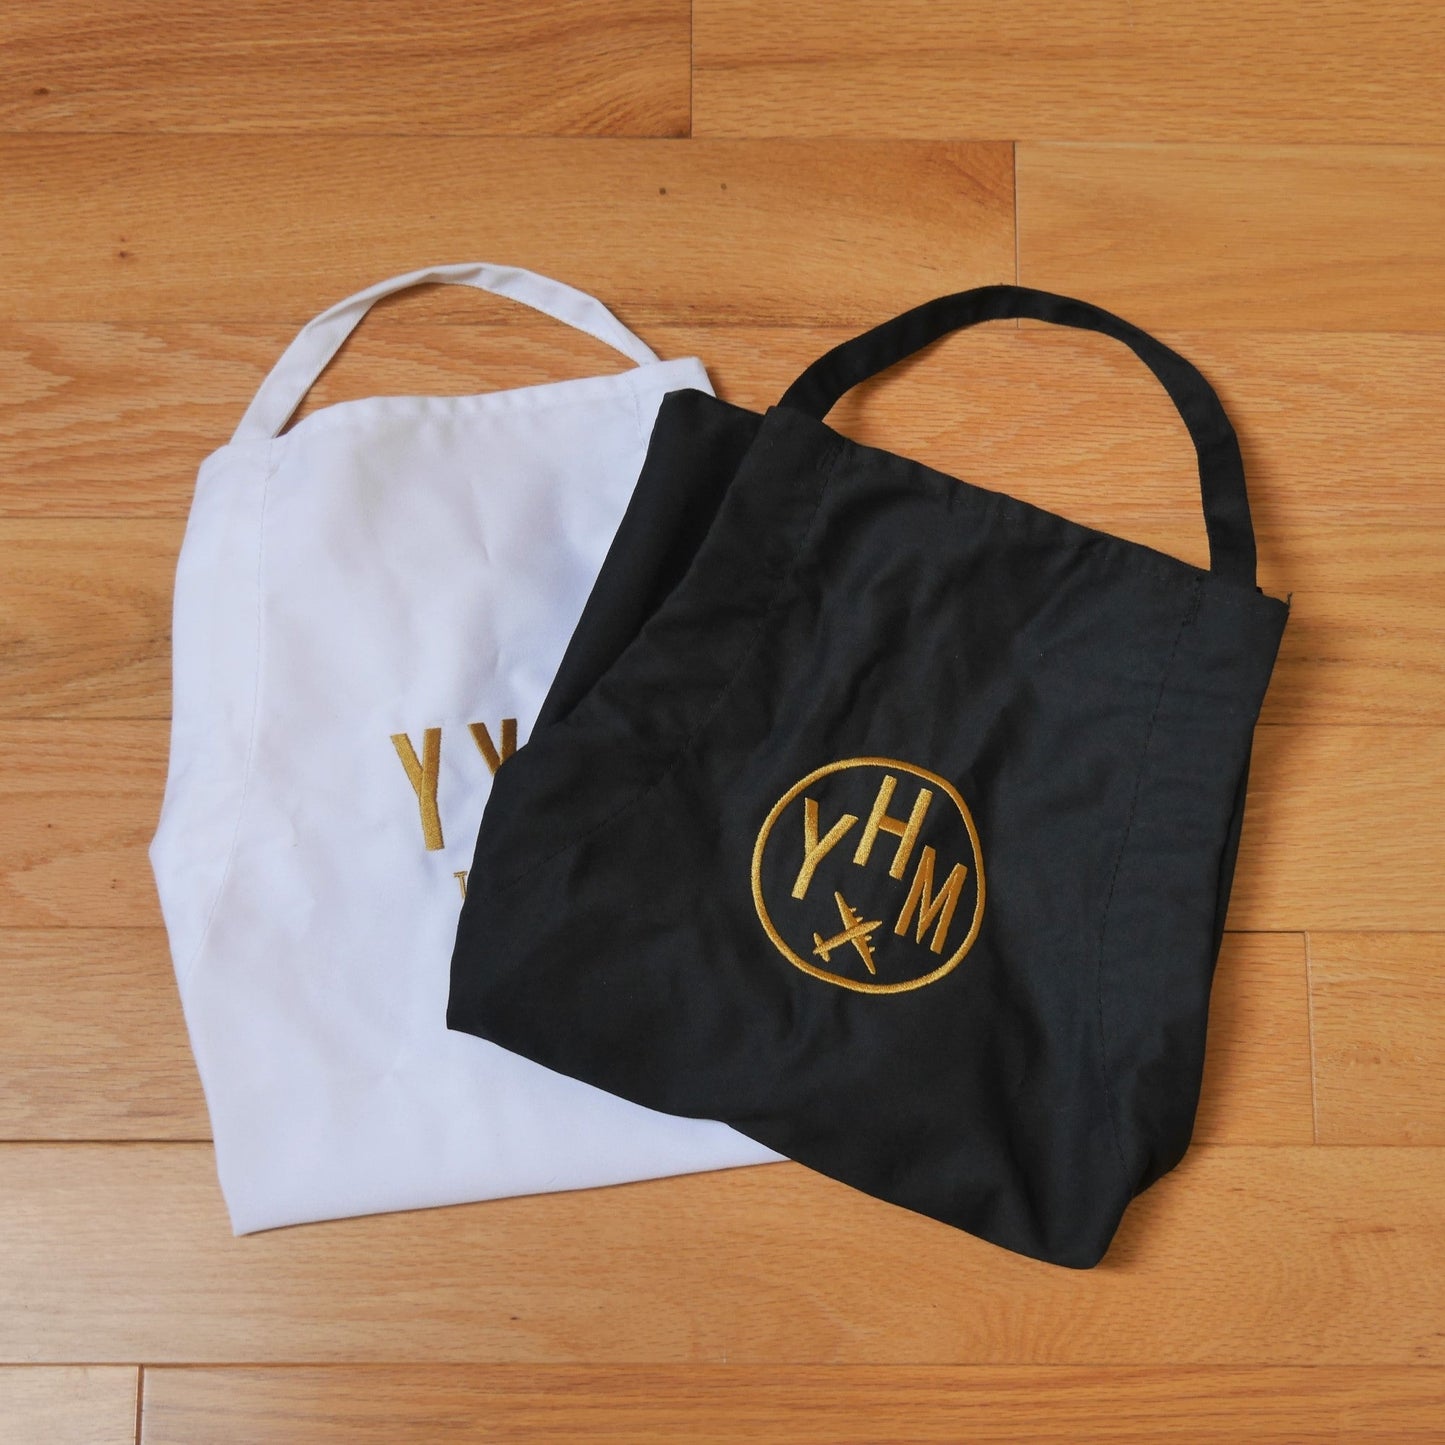 City Embroidered Apron - Old Gold • YHM Hamilton • YHM Designs - Image 14